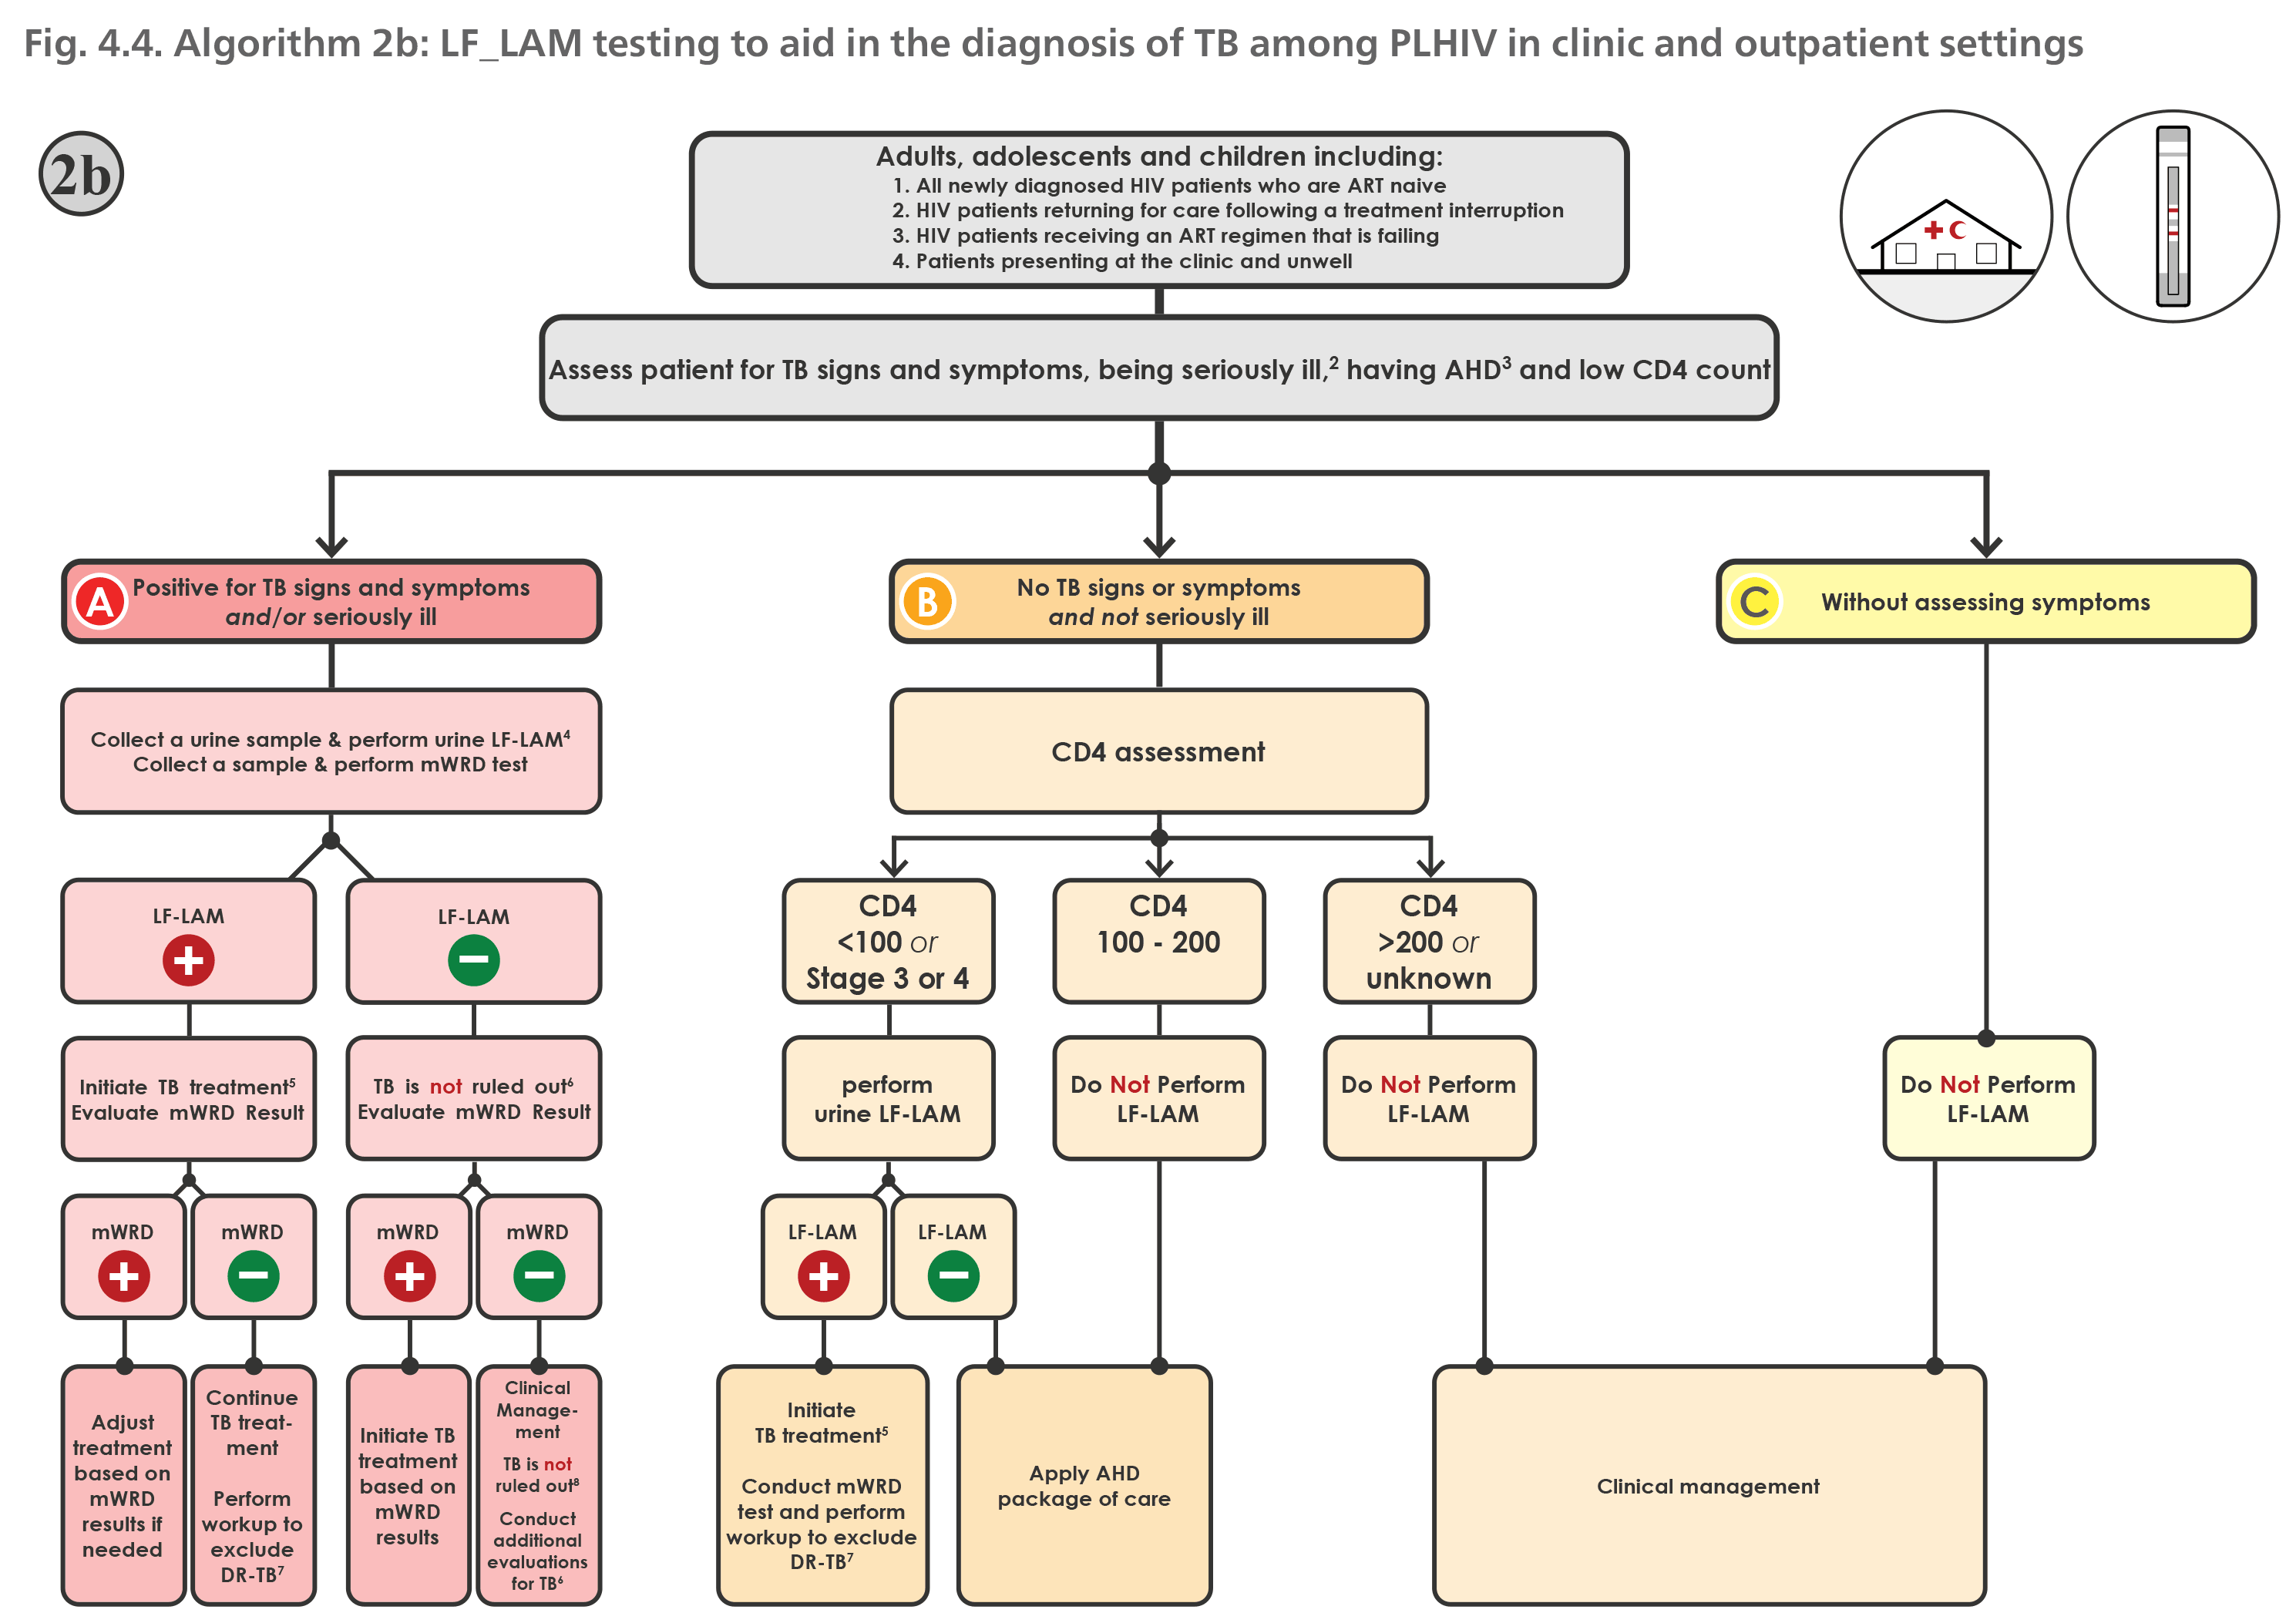 Algorithm 2b: LF_LAM testing to aid in the diagnosis of TB among People with HIV in clinic and outpatient settings